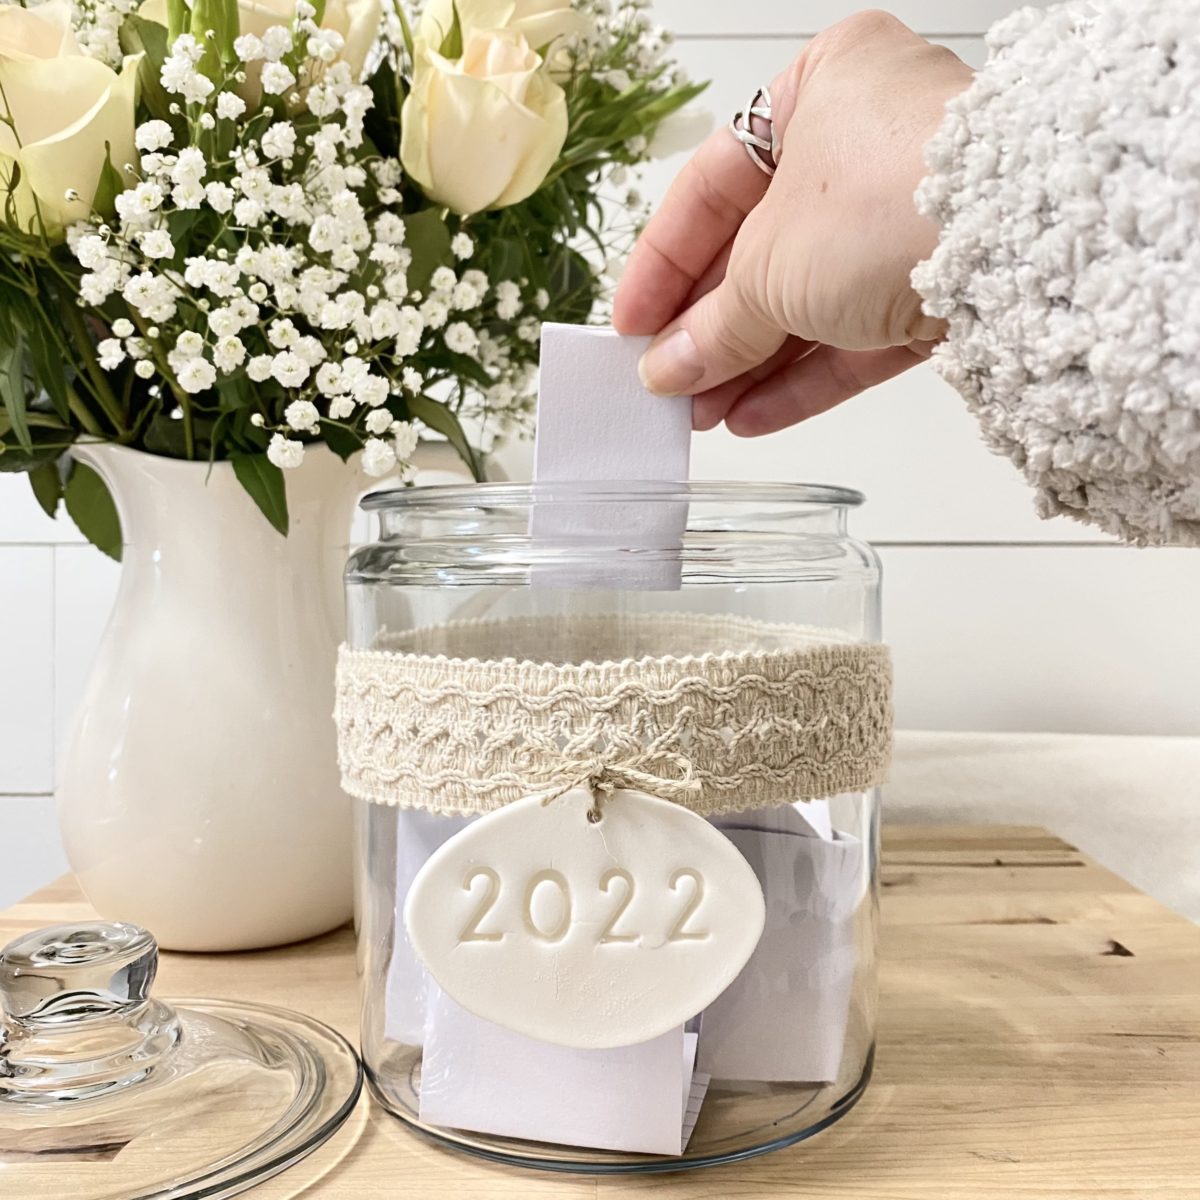 Placing a memory written on a card in the memory jar.